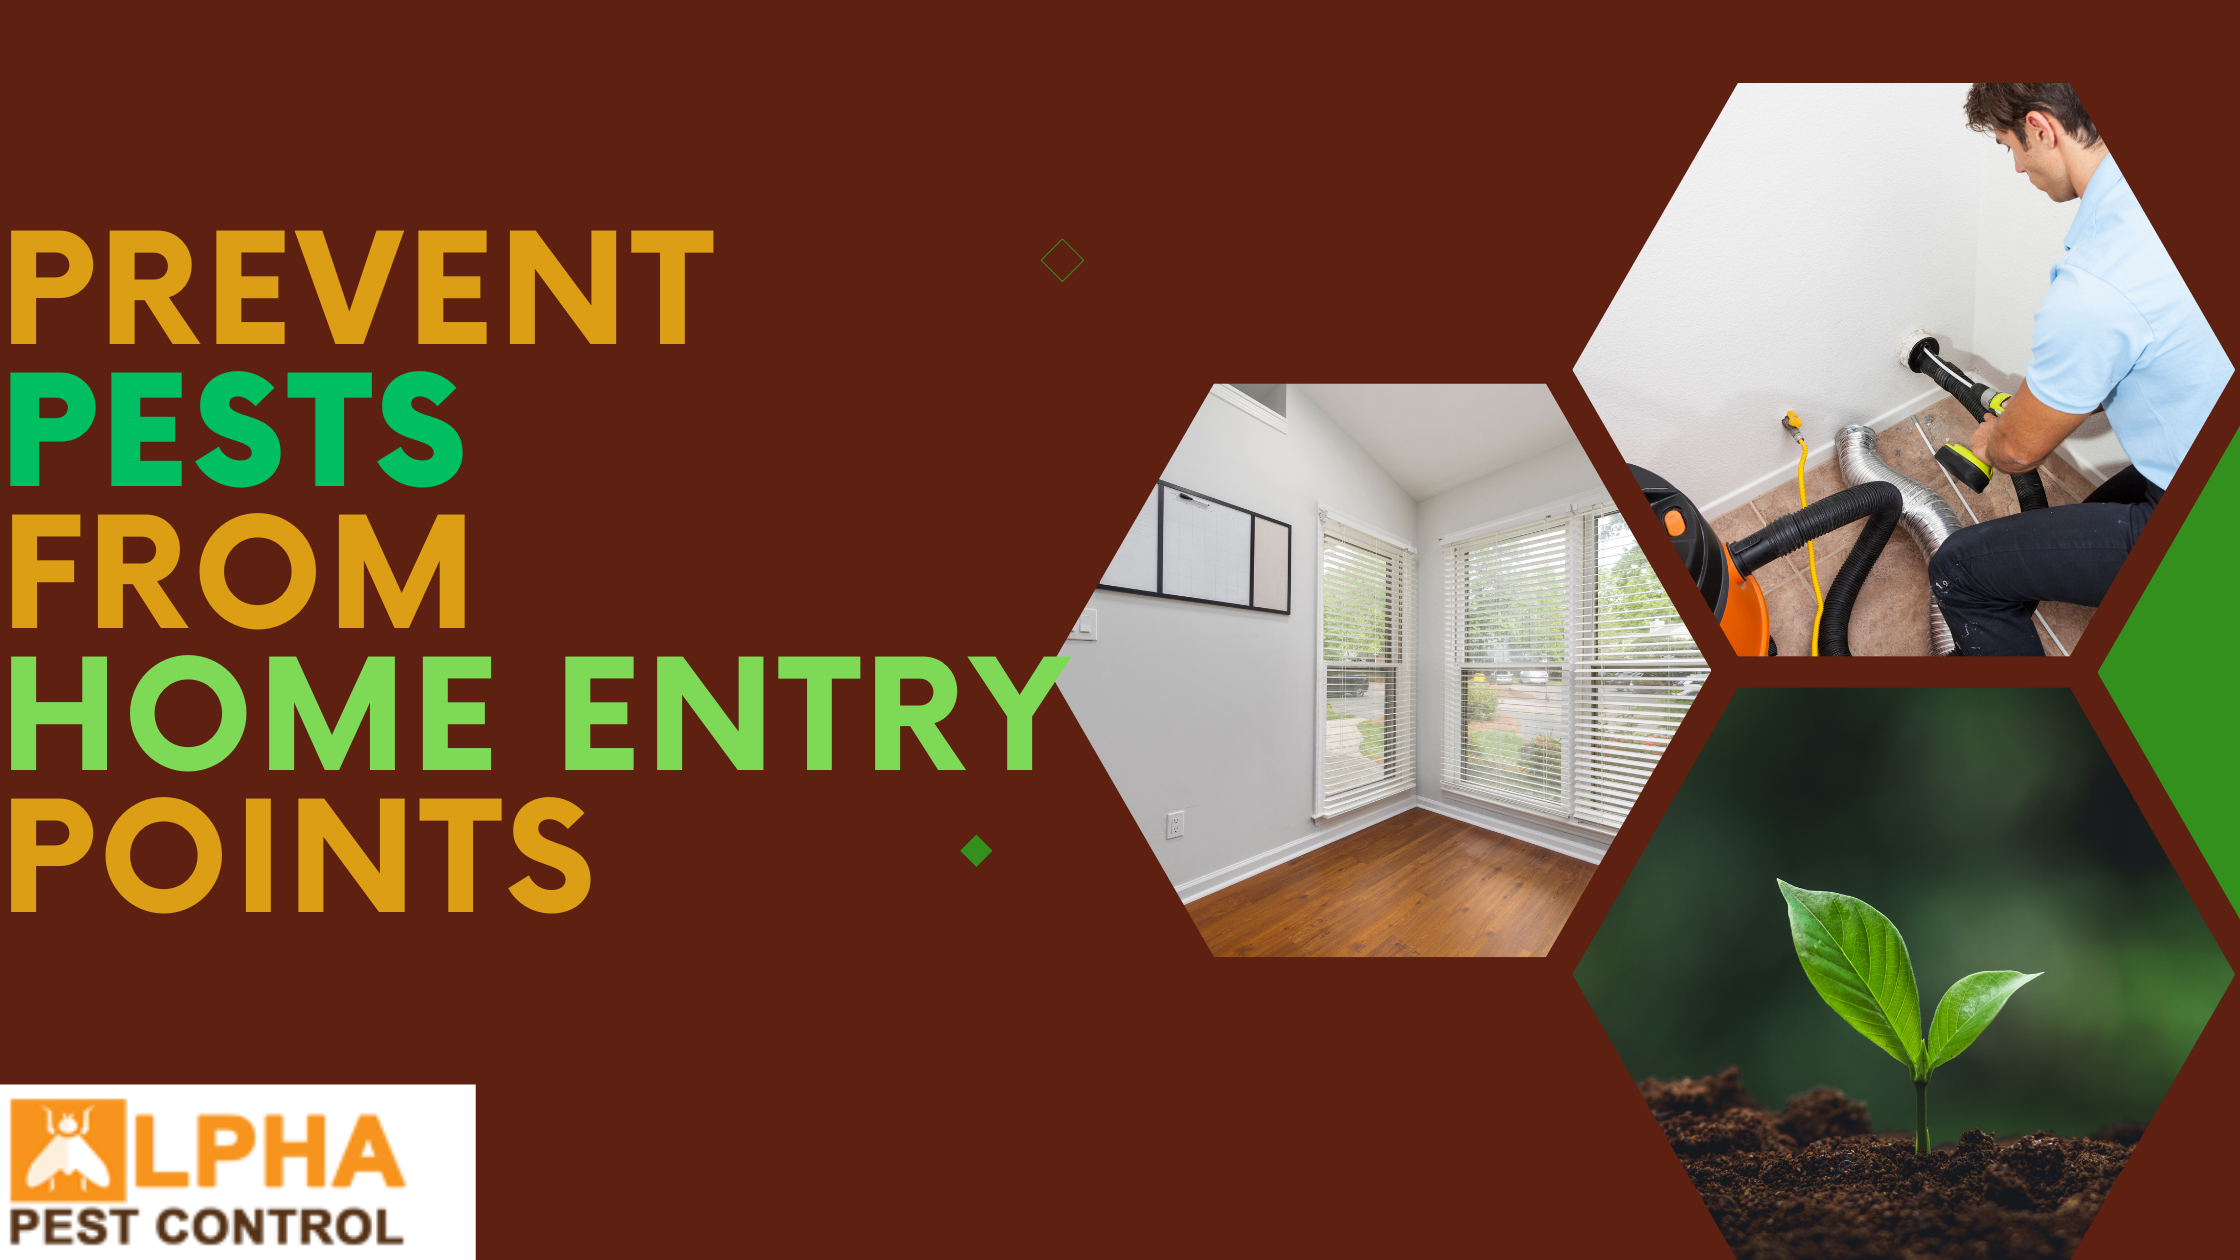 Prevent Pests from Home Entry Points